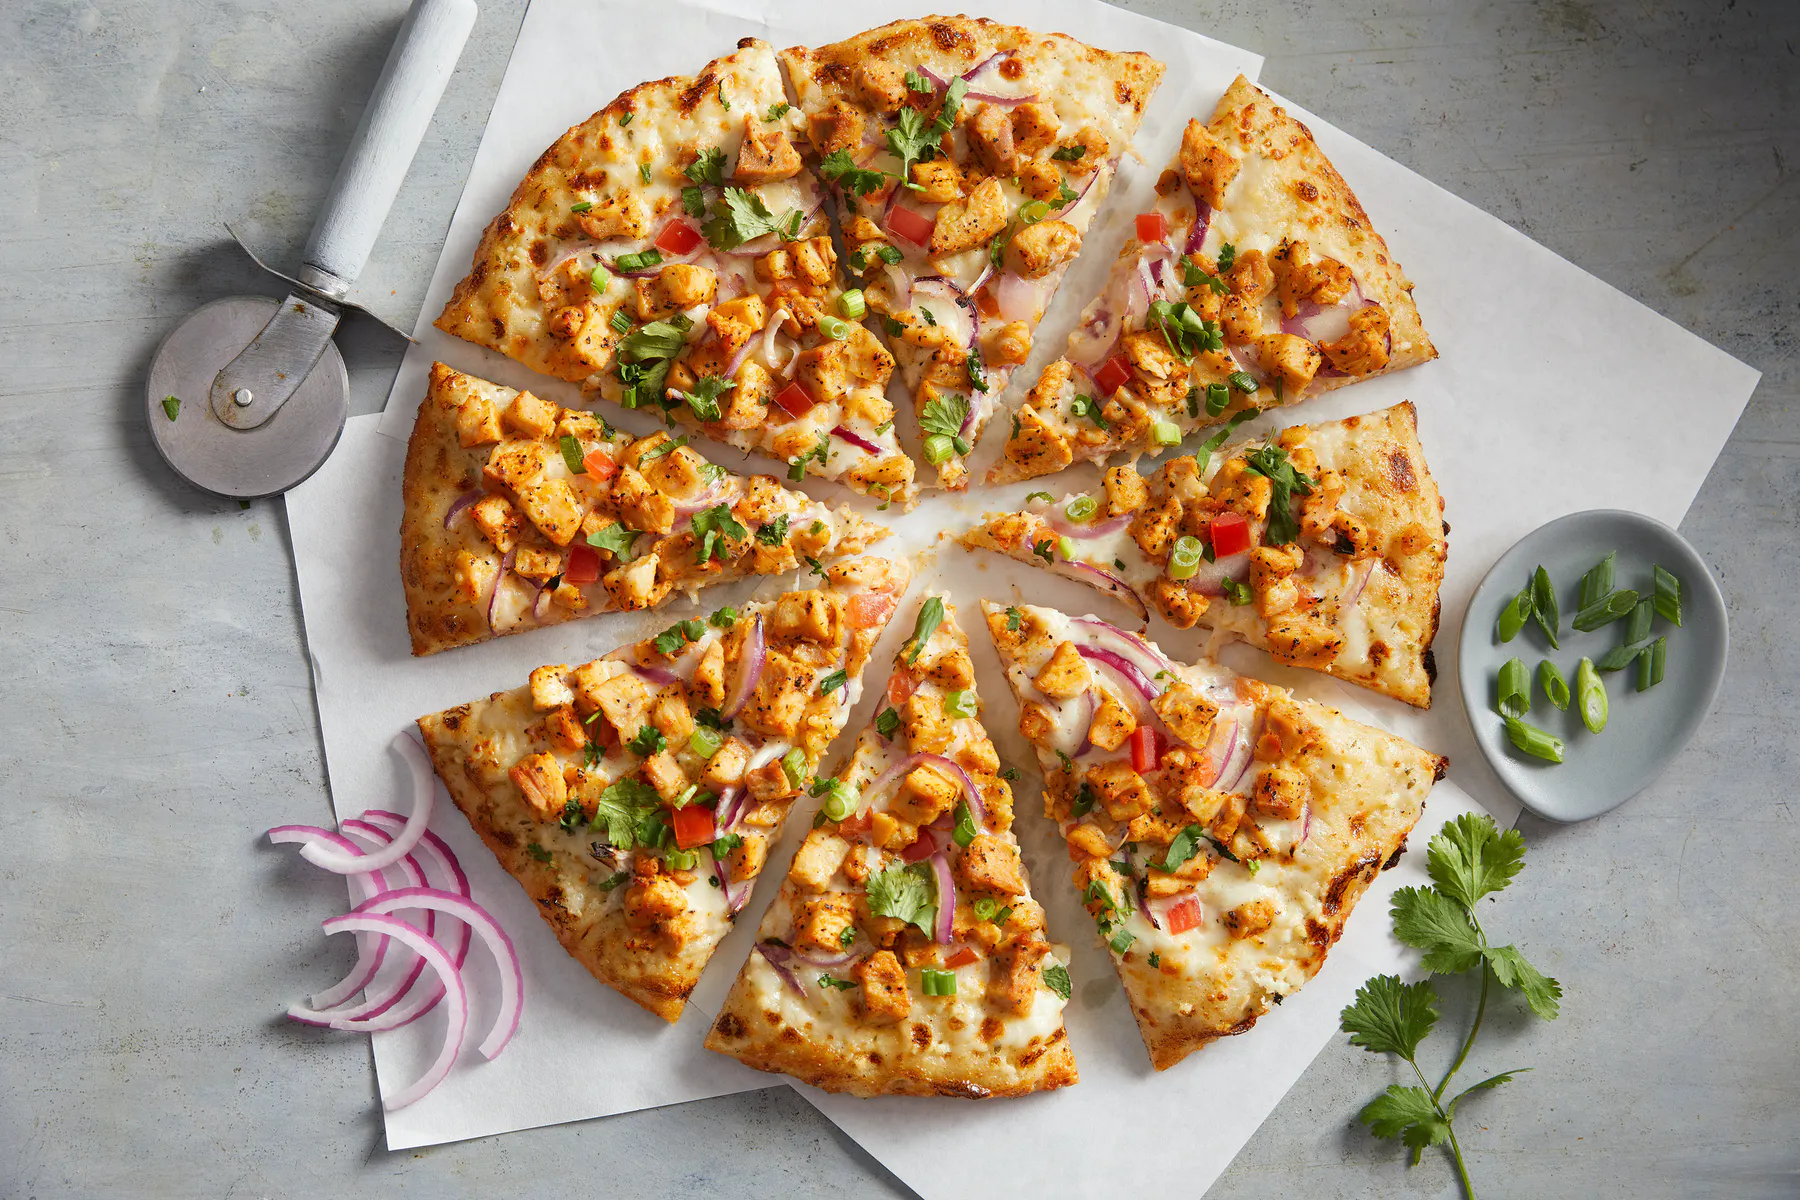 Curry Pizza House – Fresh & Spicy